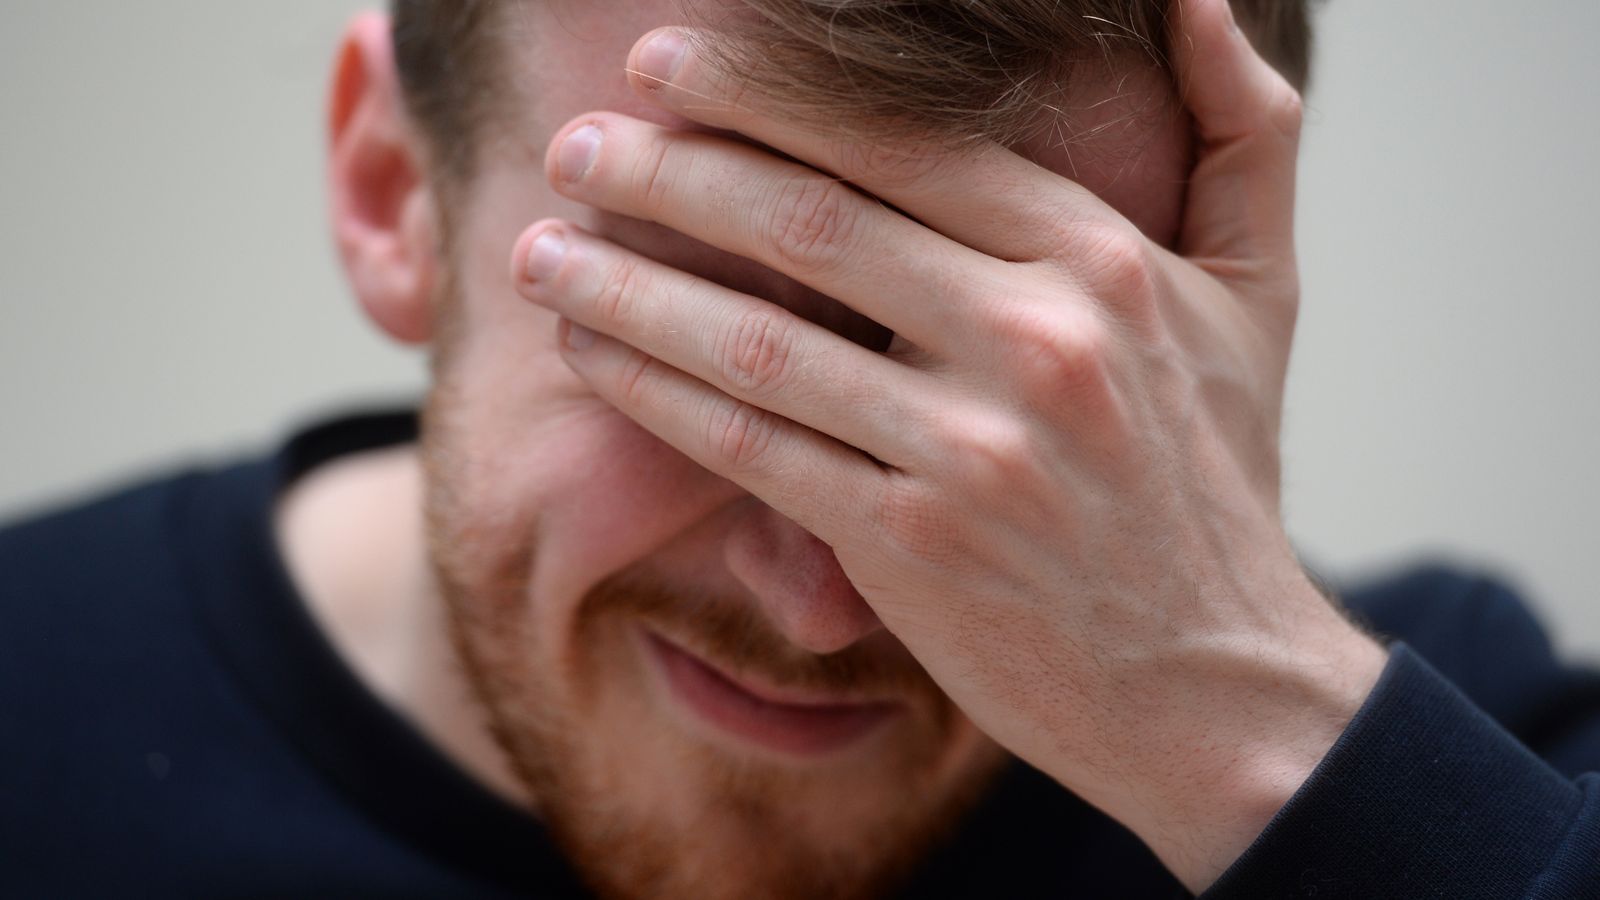 Migraine treatment times 'almost double' in England amid calls for condition to be taken seriously